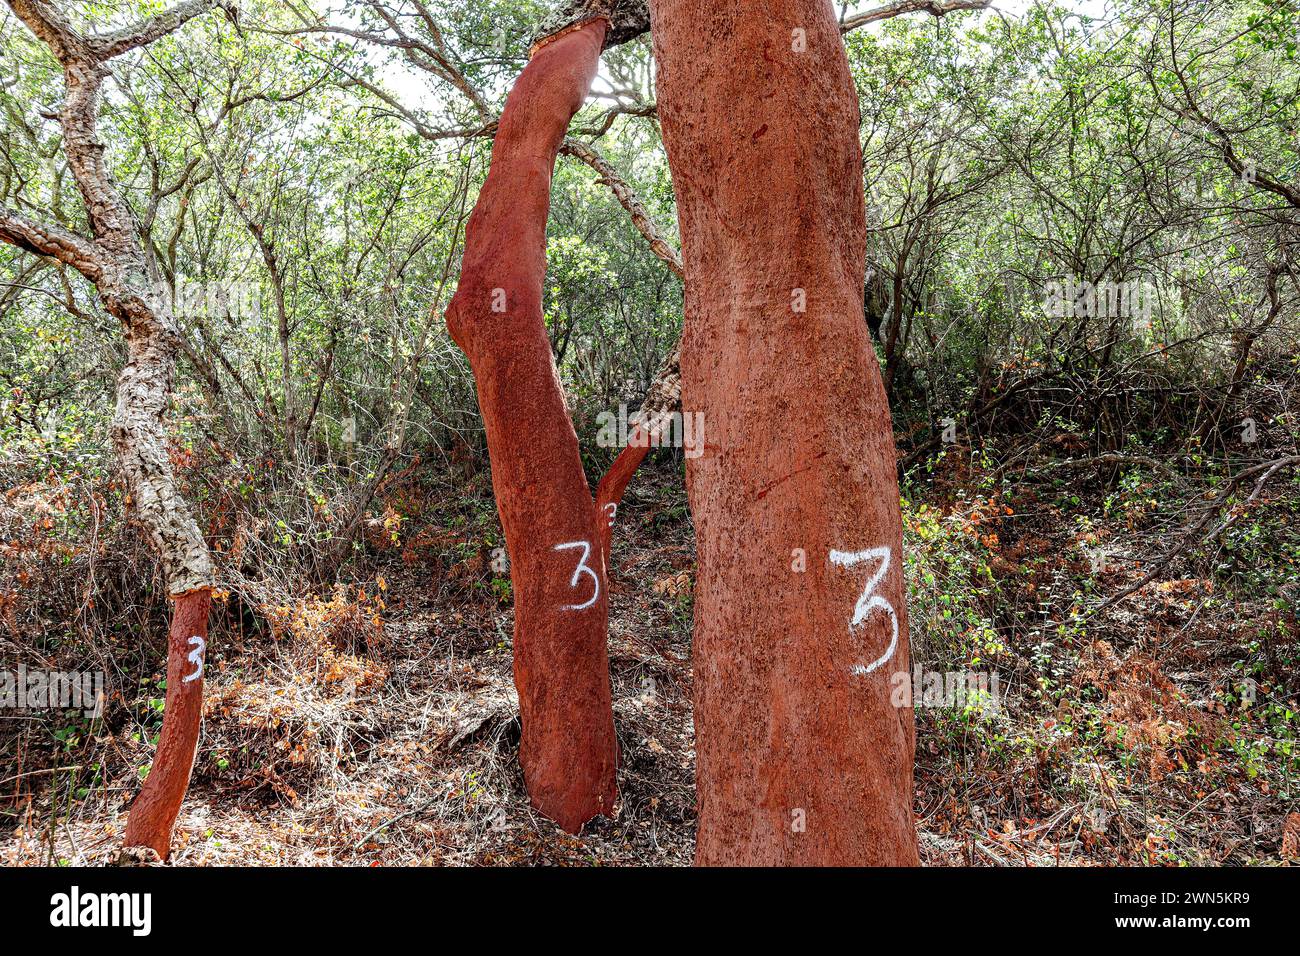 Harvested cork oak (Quercus suber) trunk in an old forest, landscape with typical portuguese vegetation, sustainable cork material, number 3 indicates Stock Photo